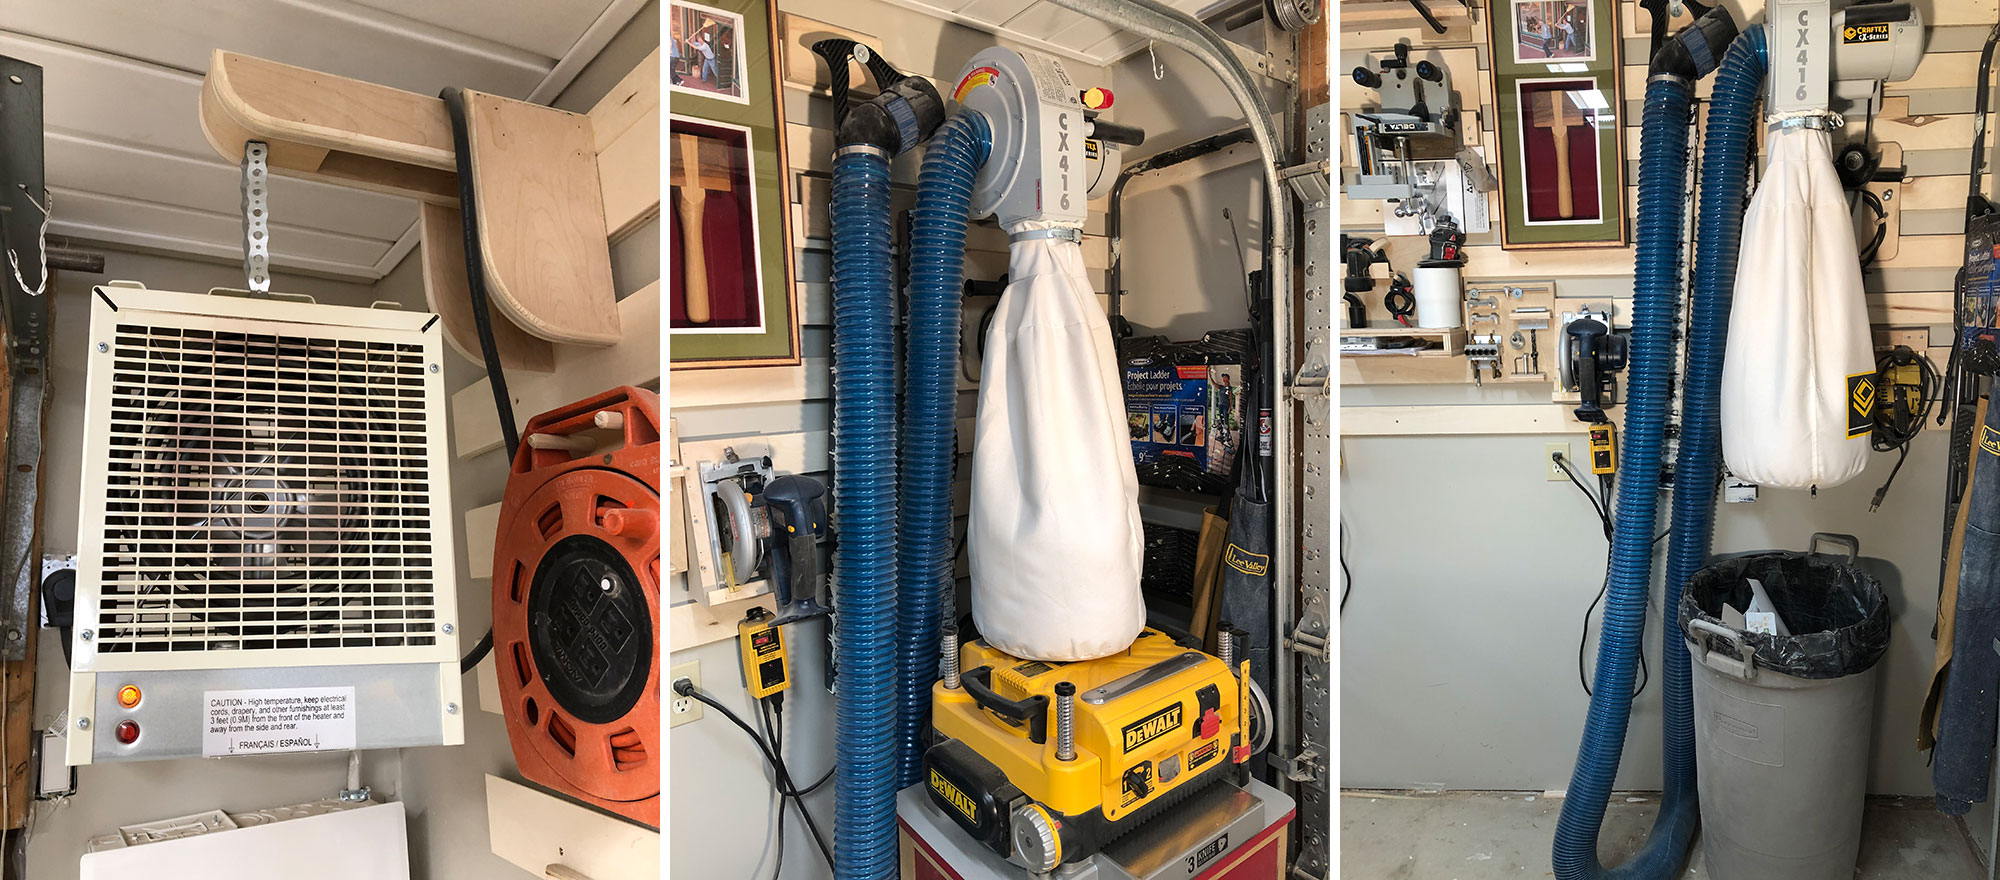 Image 1: Shop heater on cleat-mounted hook. Image 2: Wall-mounted dust collector. Image 3: Dust collector with trash can beneath.